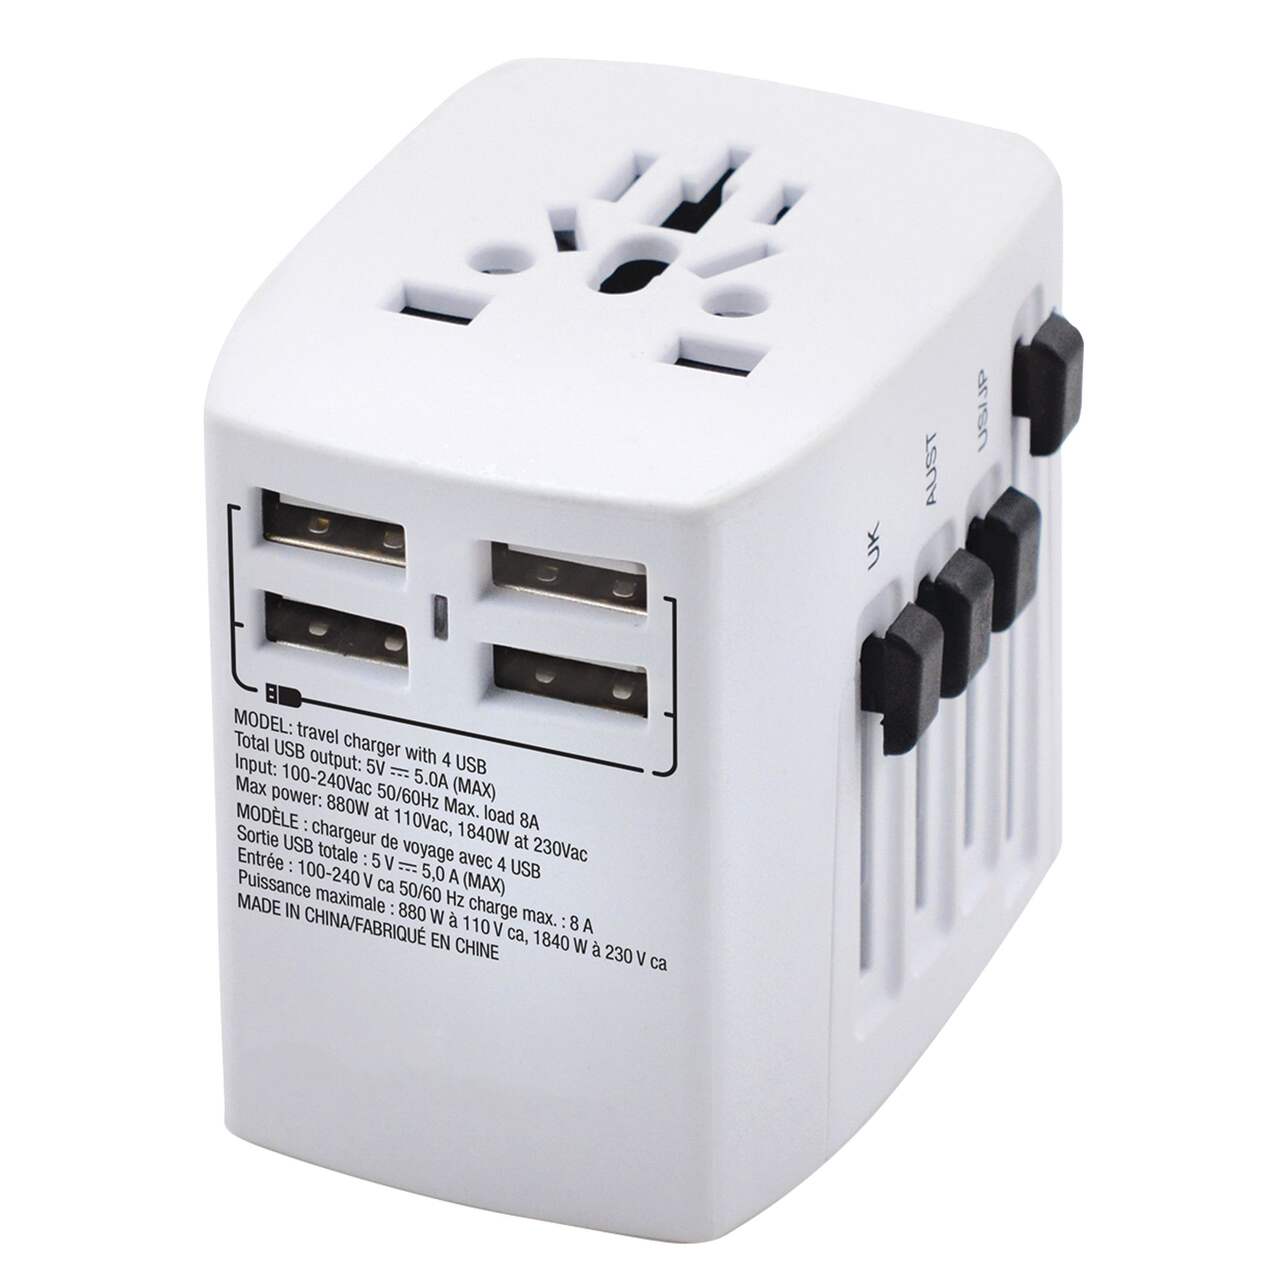 https://media-www.canadiantire.ca/product/playing/camping/backpacks-luggage-accessories/0765930/maple-leaf-4-port-usb-universal-travel-adapter-c0c52a11-b0d6-45ca-adf9-5b289a7d12ef-jpgrendition.jpg?imdensity=1&imwidth=640&impolicy=mZoom